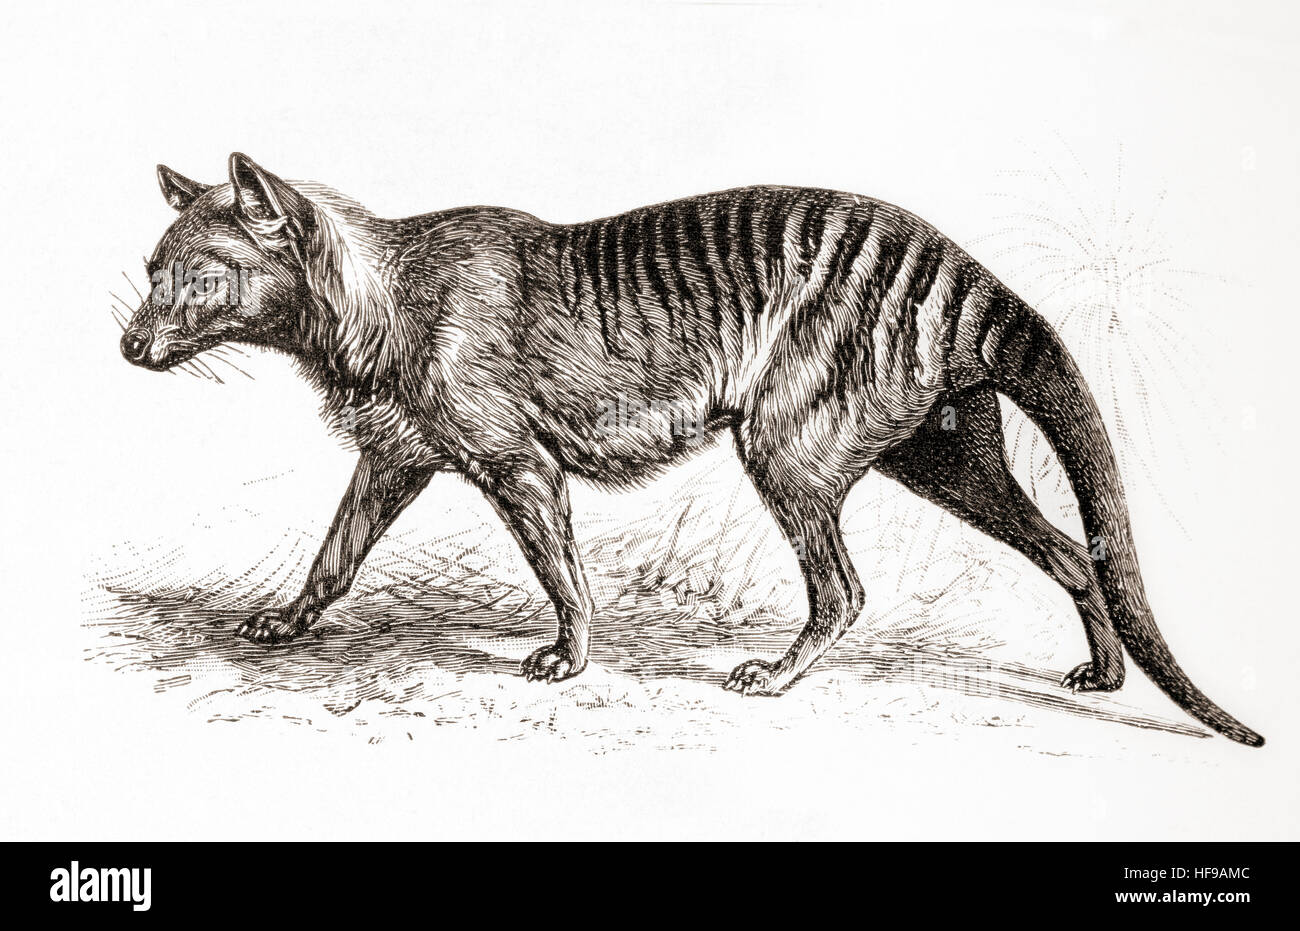 A thylacine,Thylacinus cynocephalus, aka Tasmanian tiger (because of its striped lower back) or Tasmanian wolf.  From Meyers Lexicon, published 1924. Stock Photo